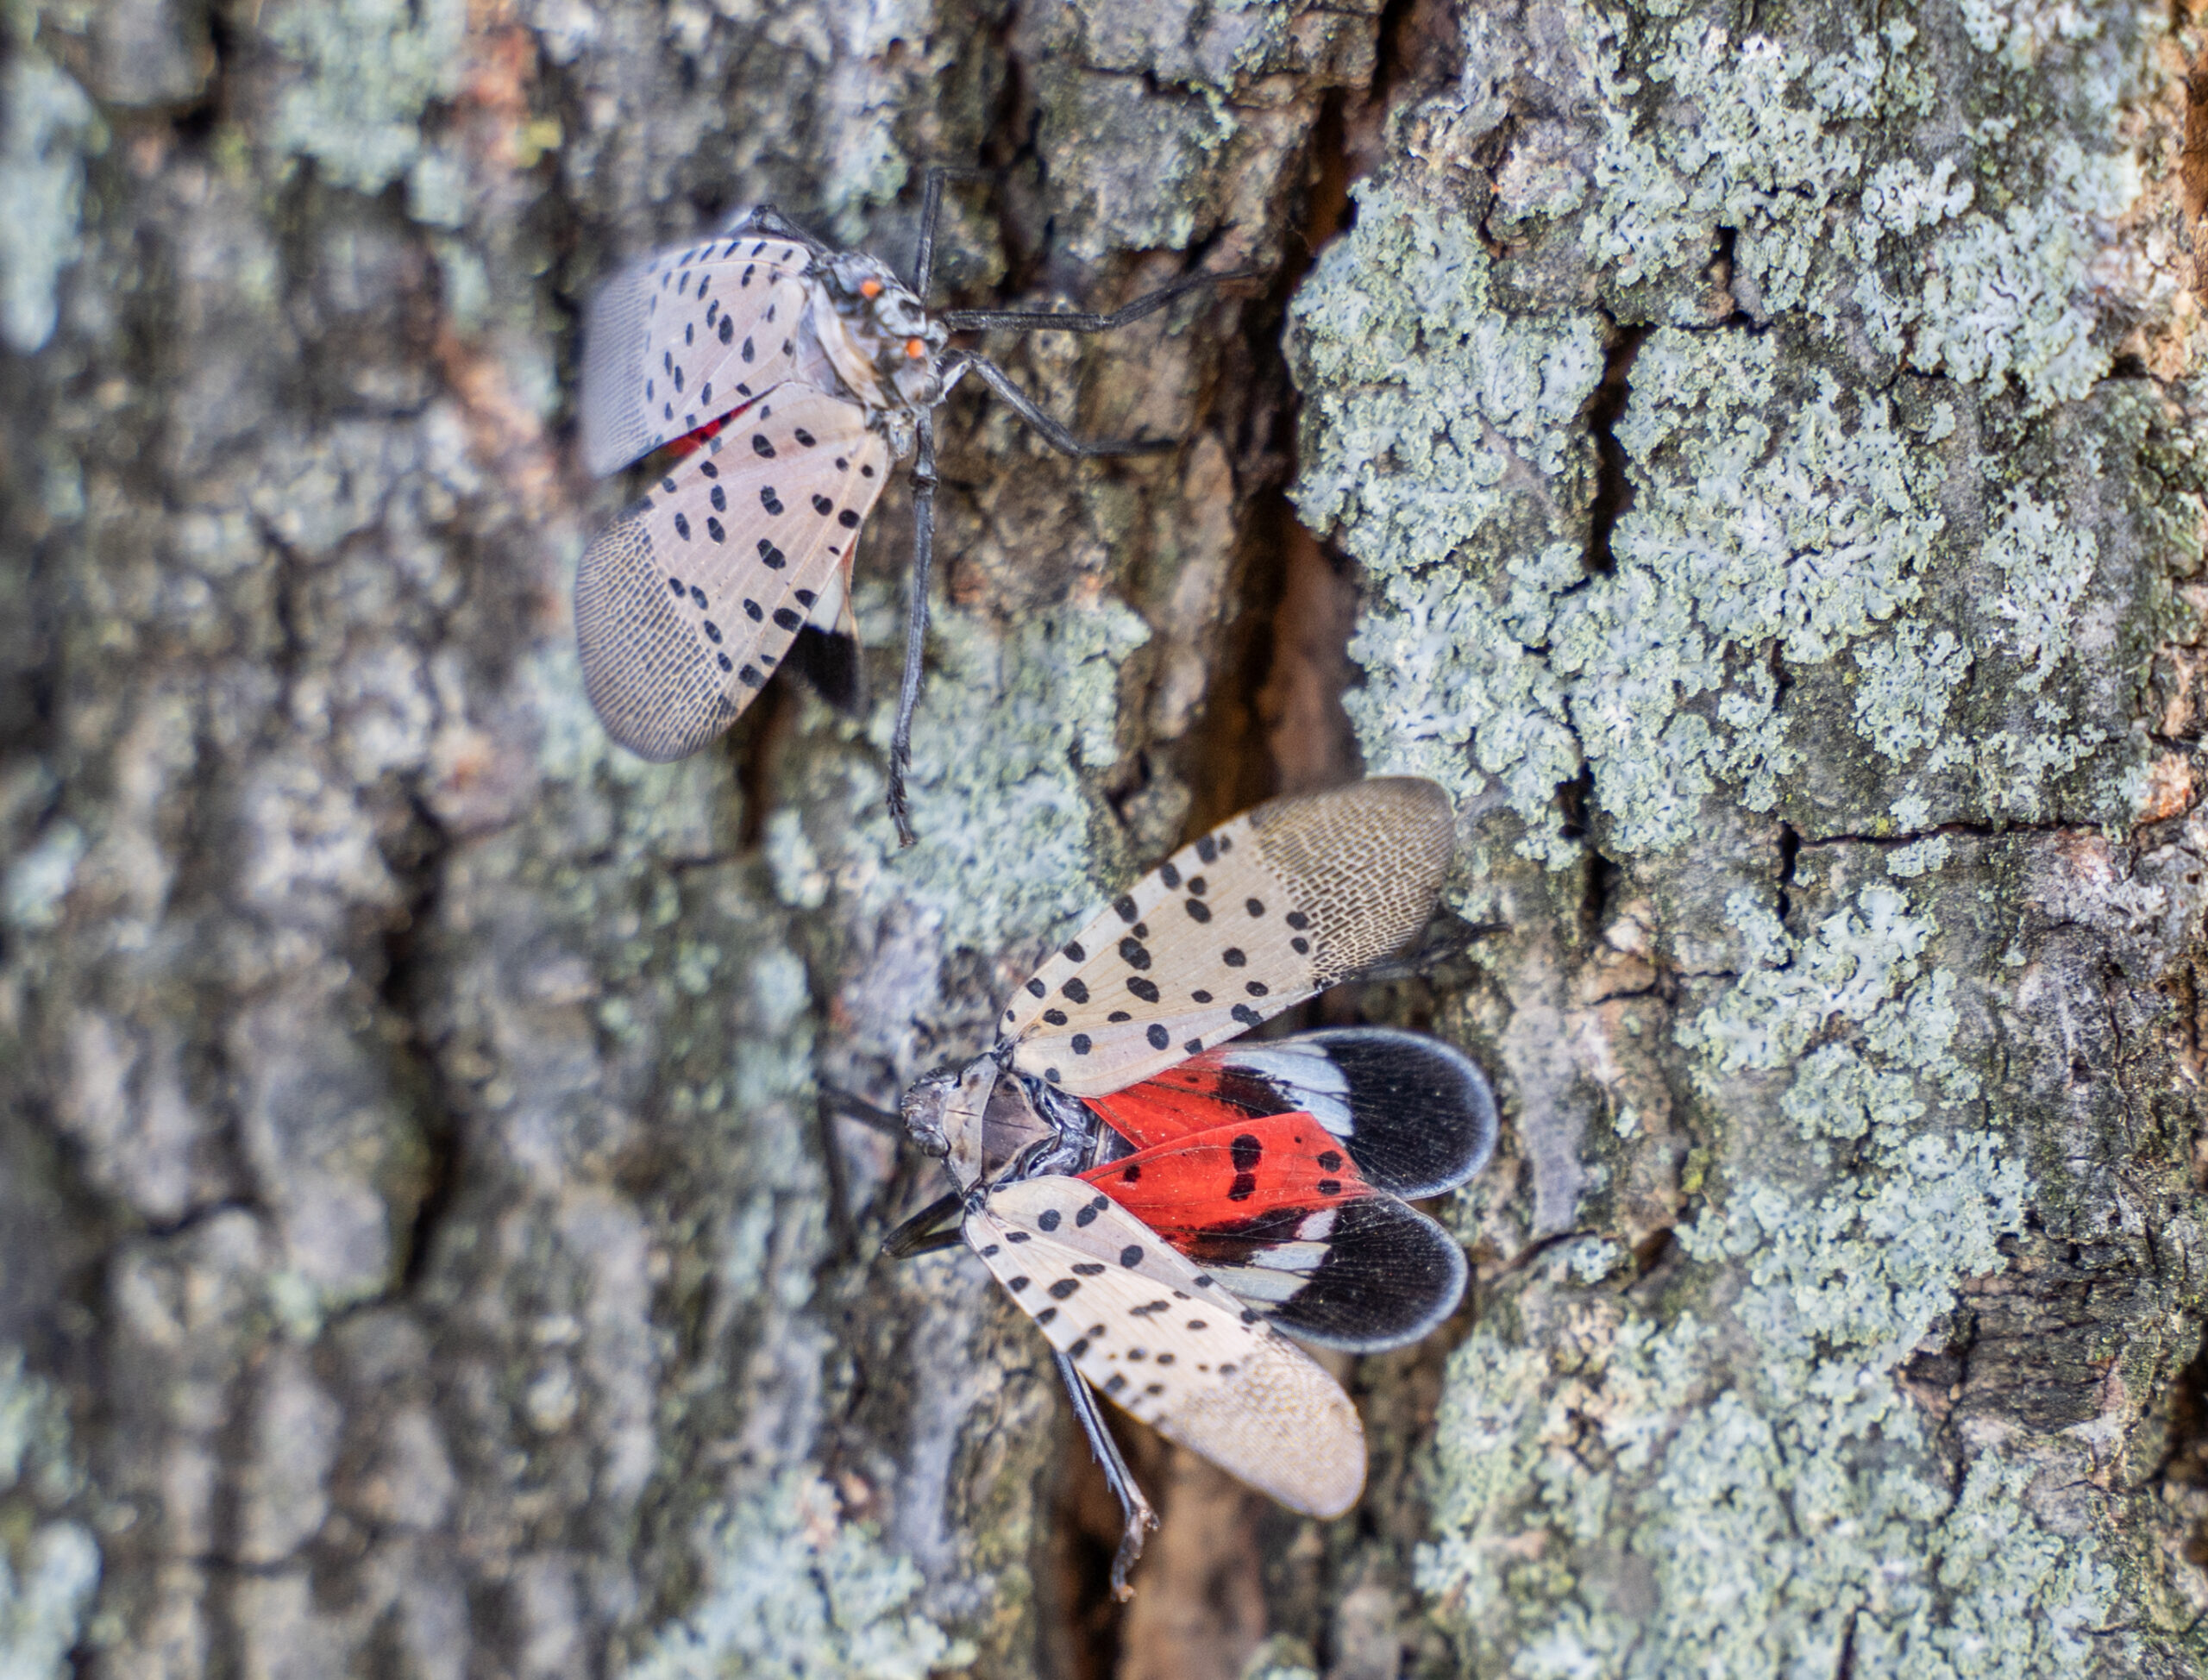 Spotted Lanternflies on tree trunk